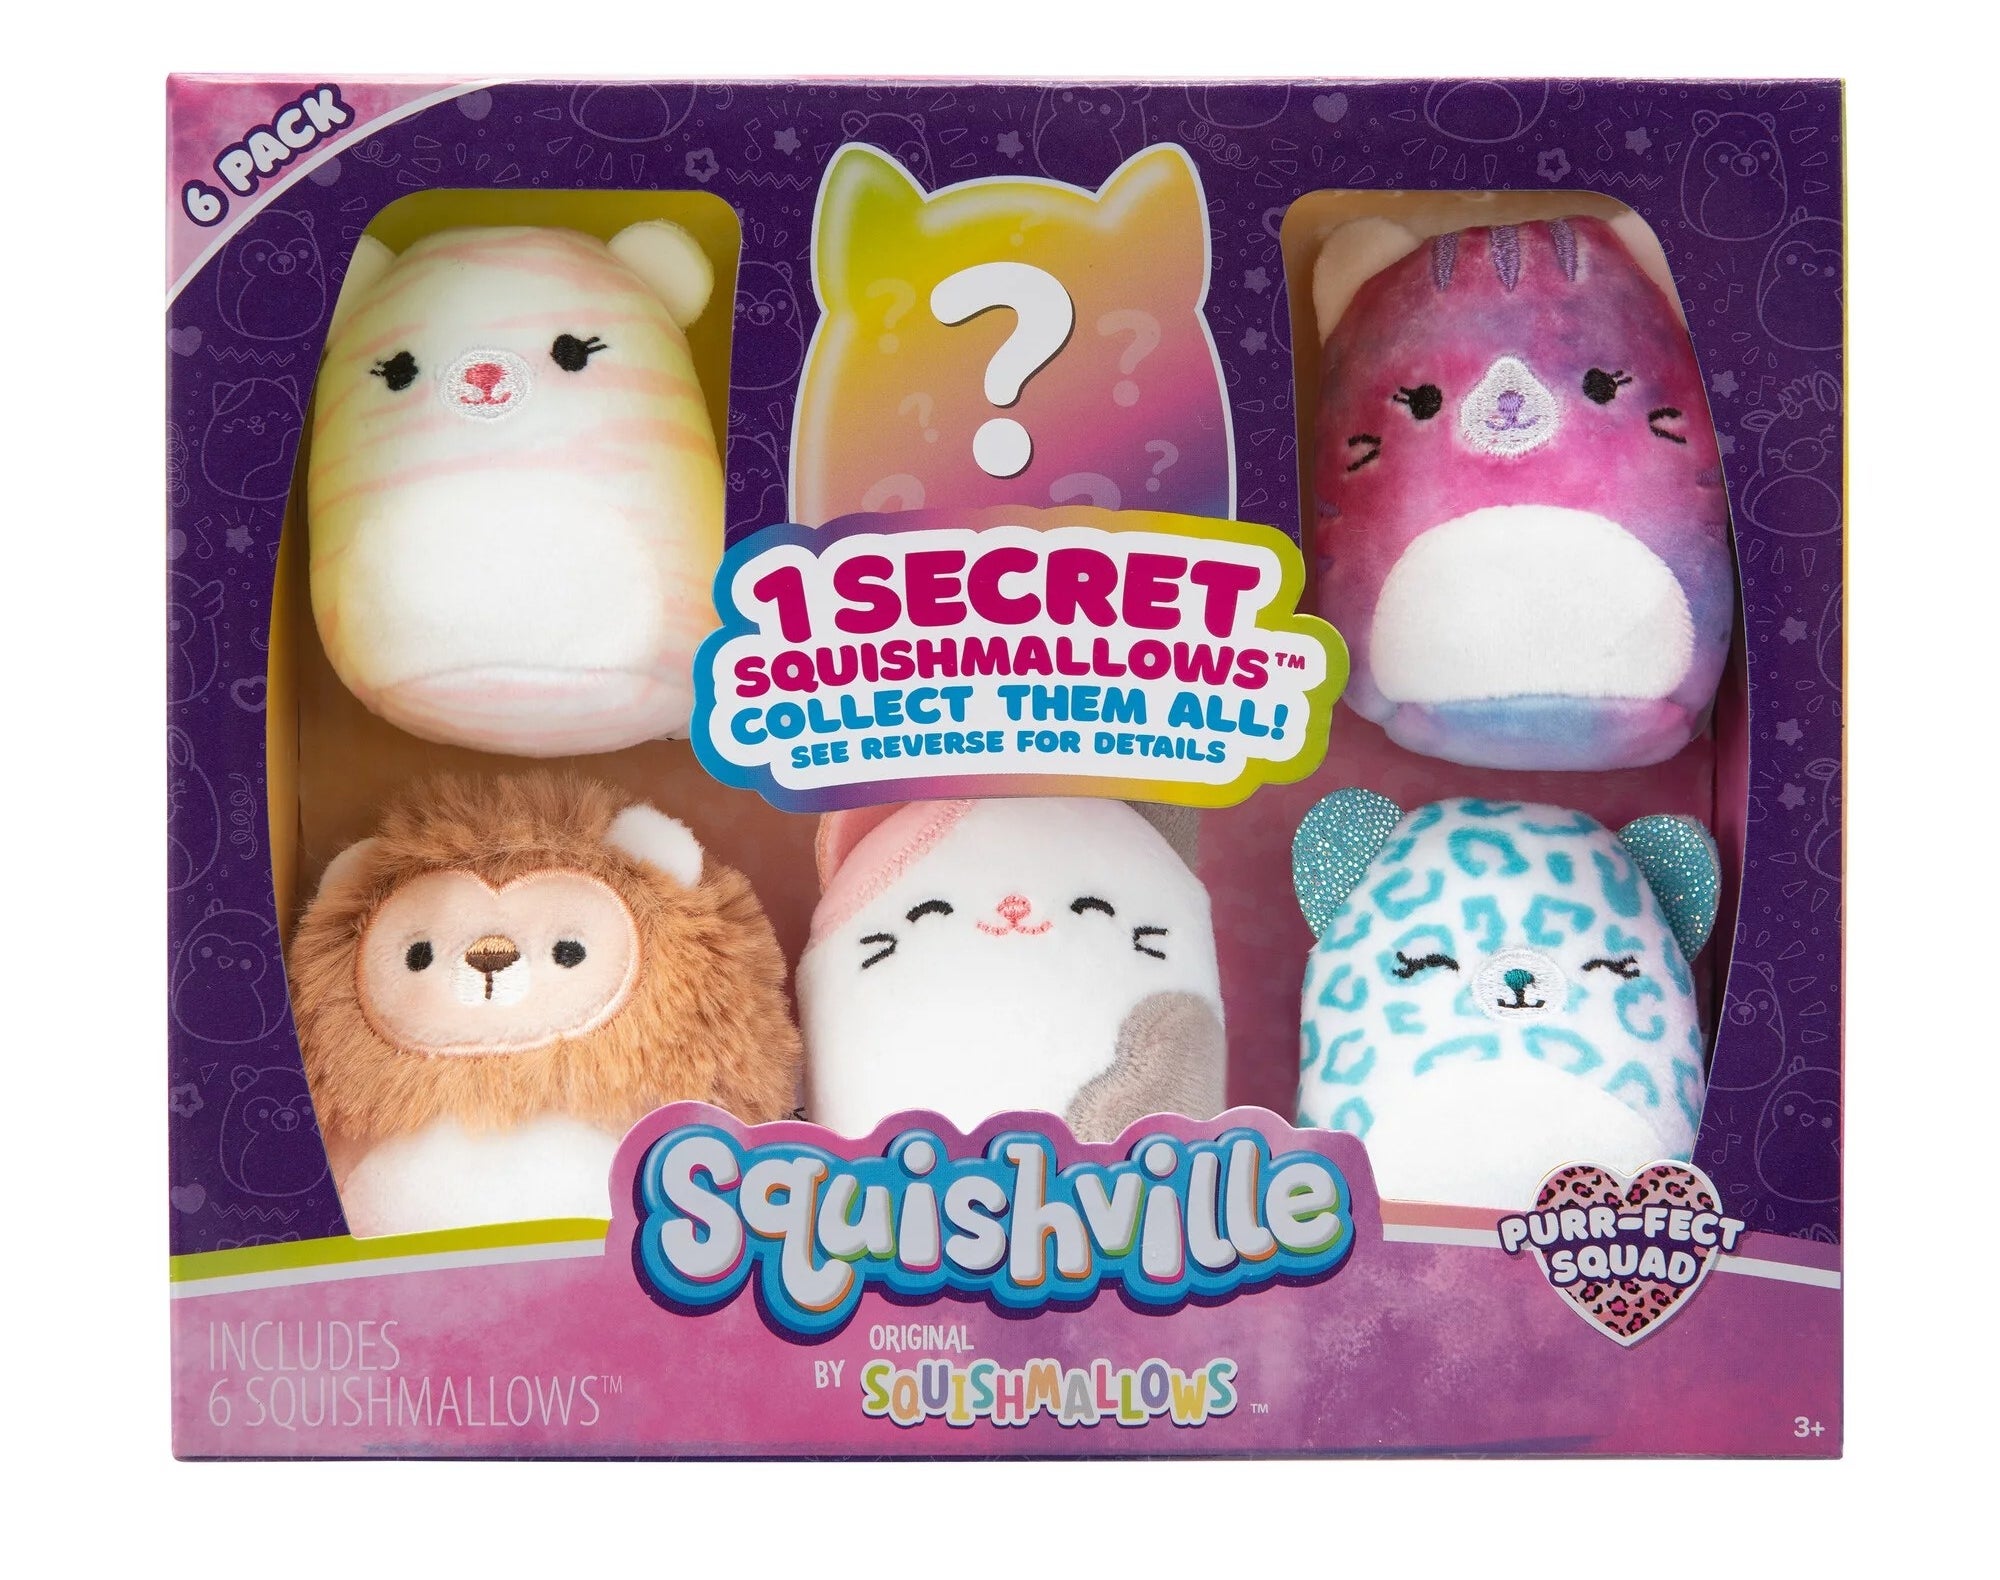 Package of squishville cats